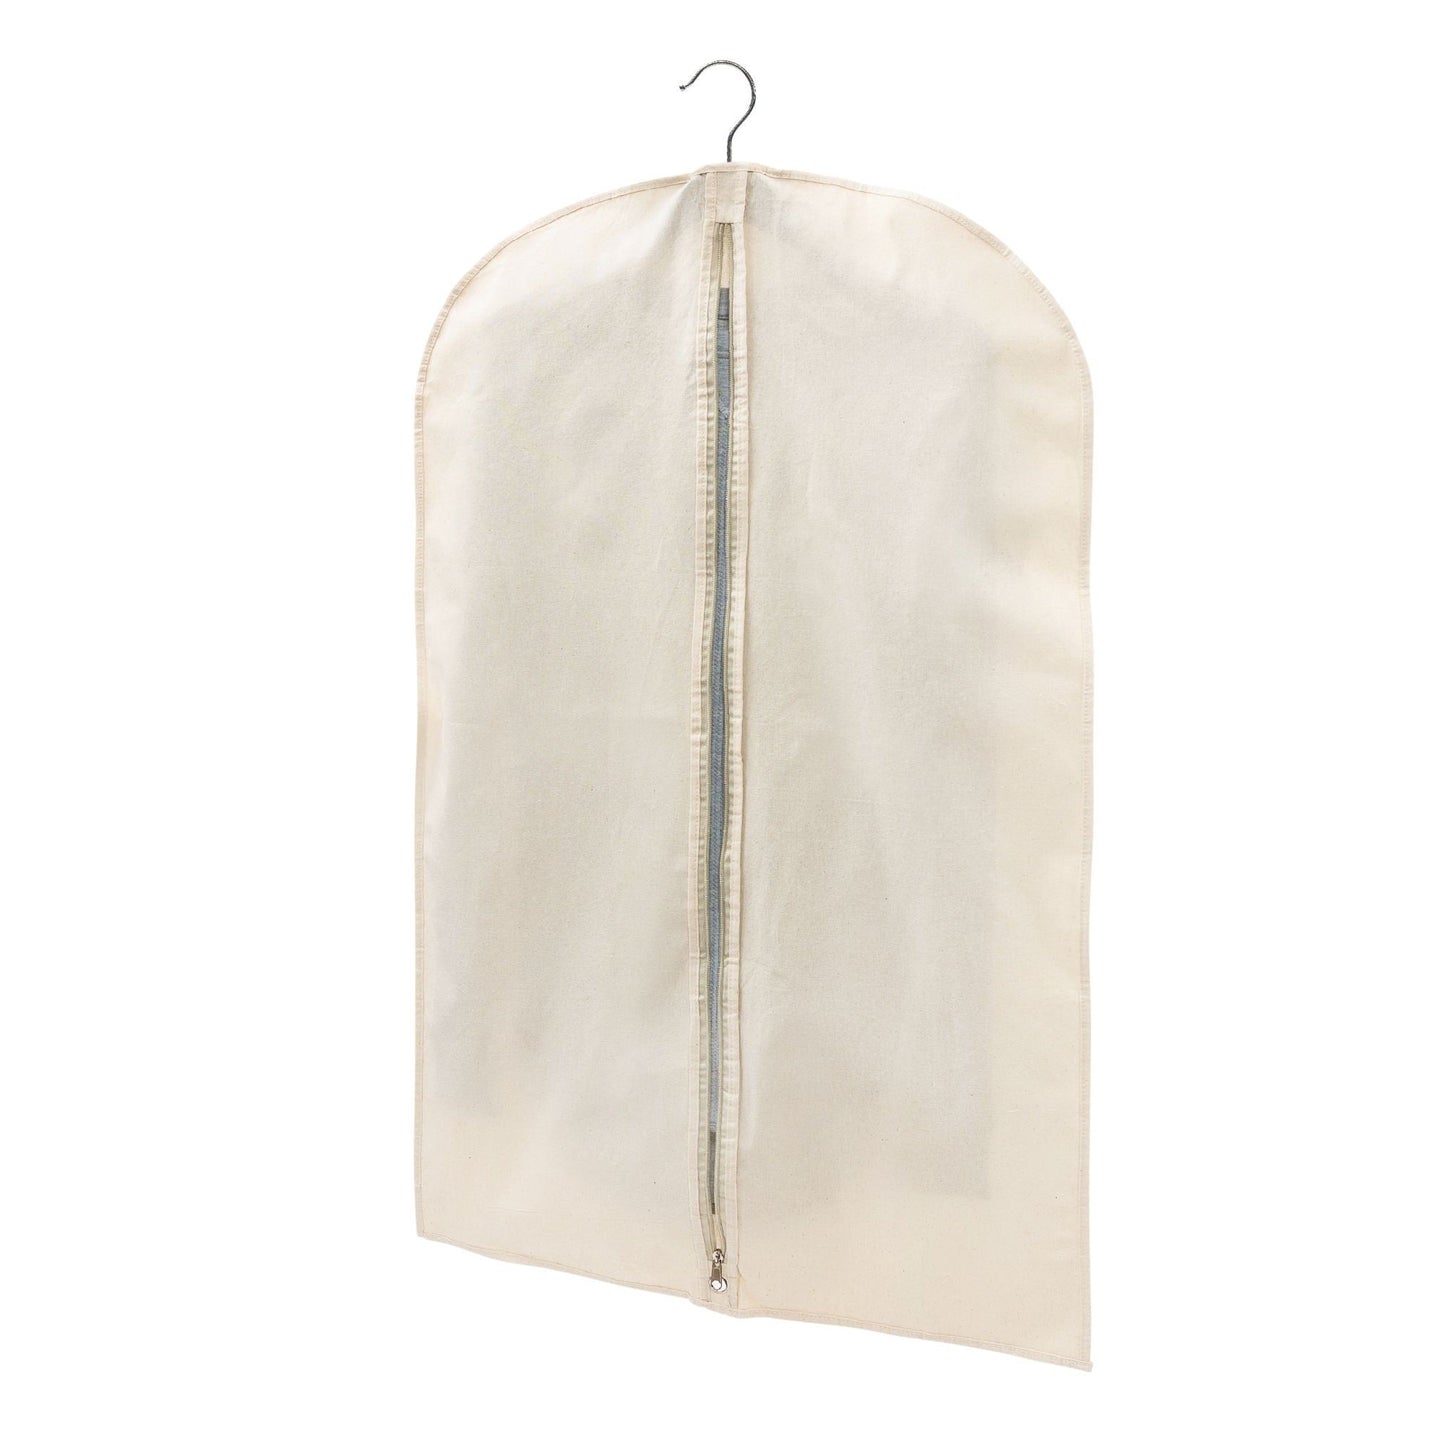 100% Cotton Fabric Garment Bags 61 X 105 cm Sold in 1/3/5